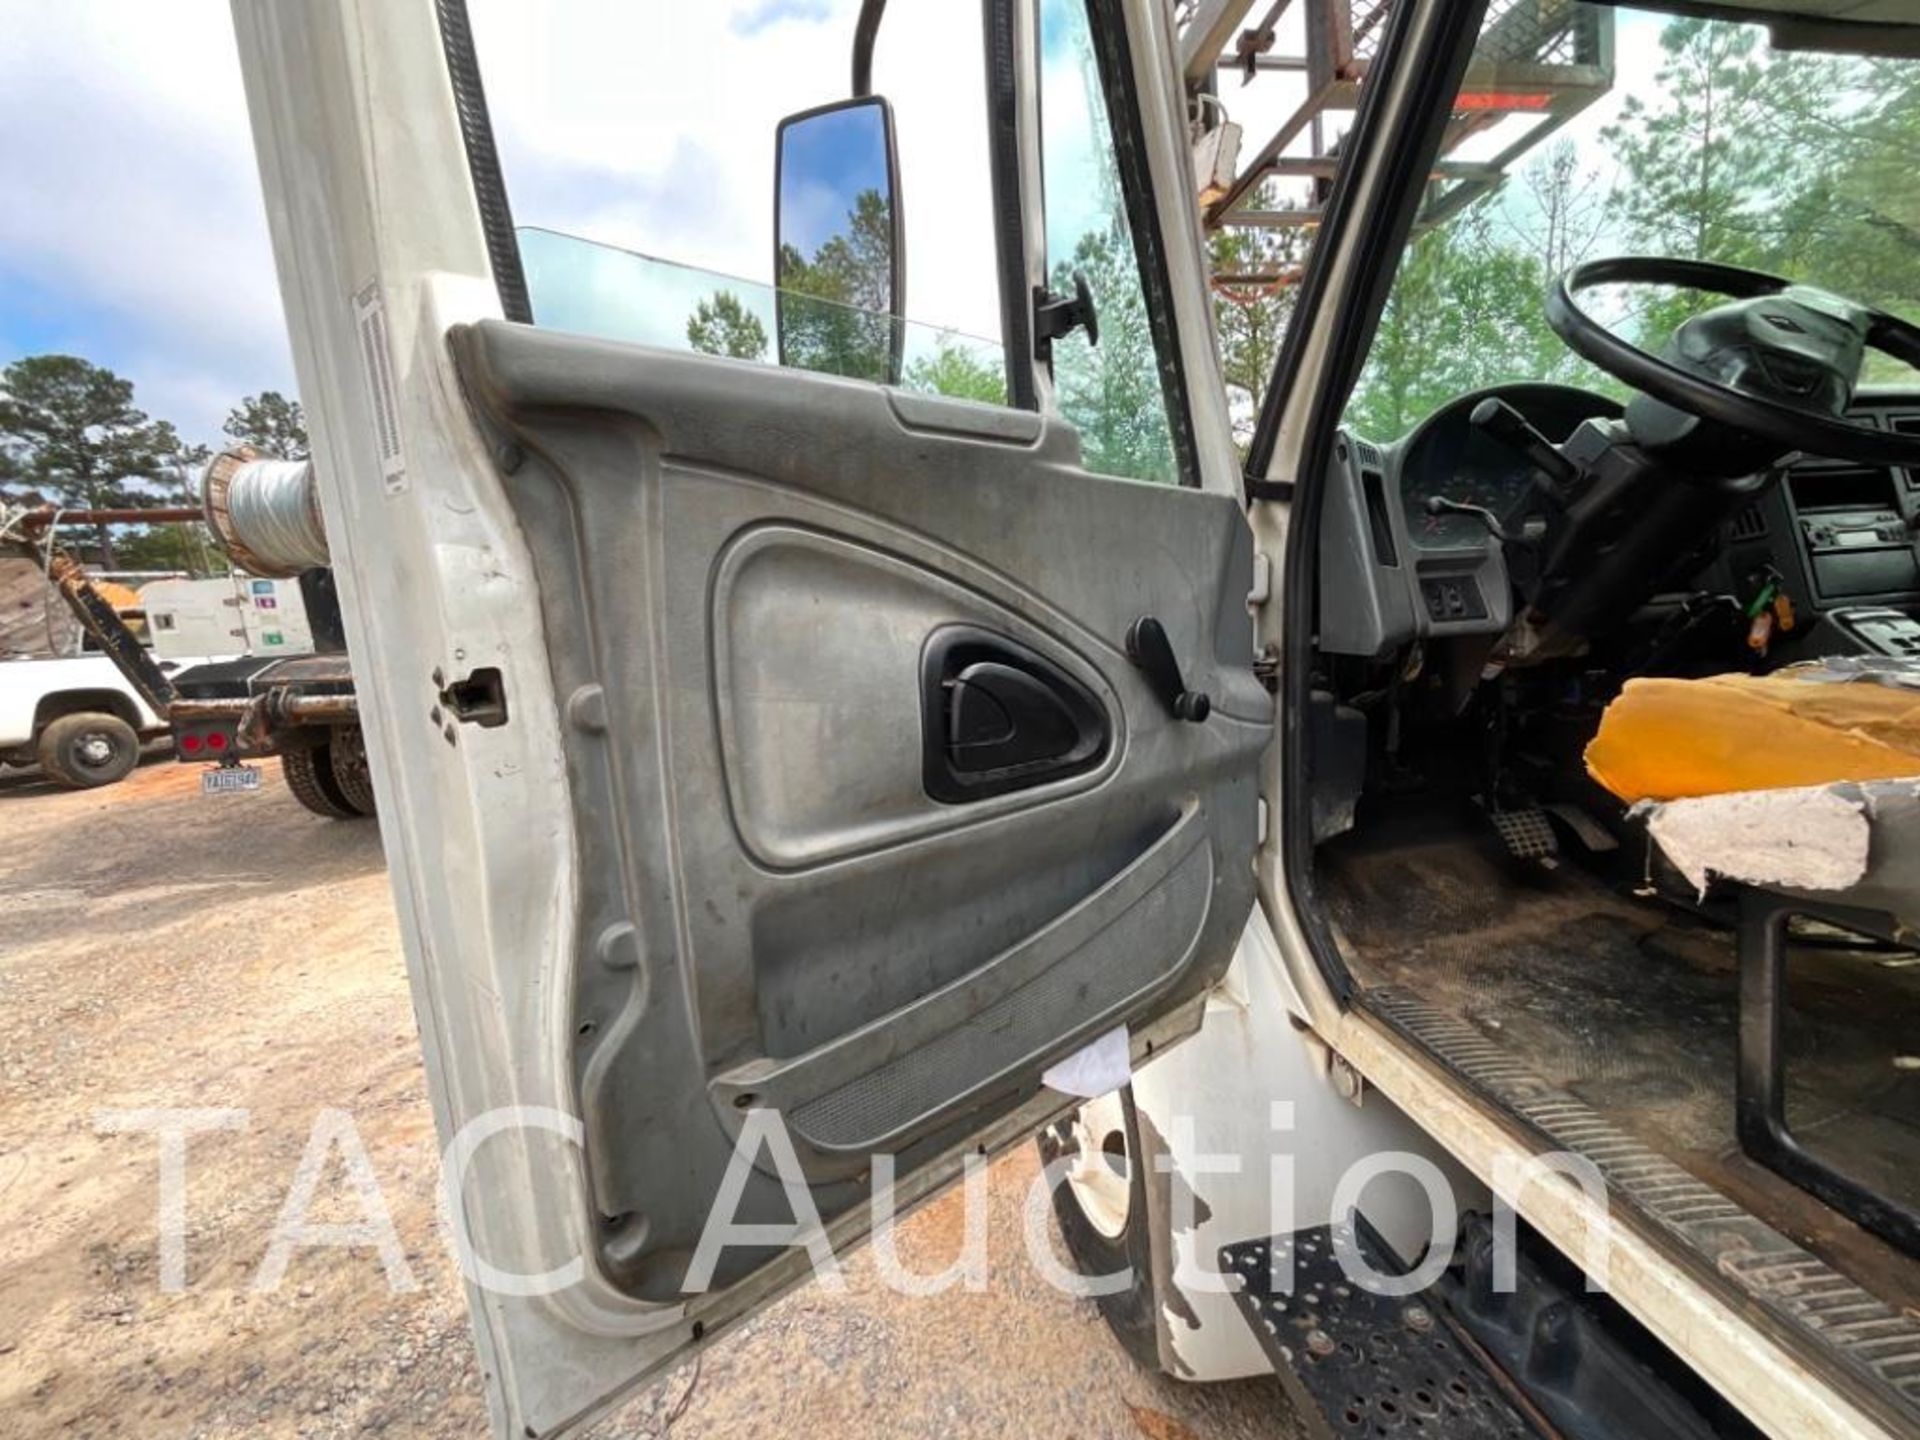 2006 International 4300 Cable Placer Bucket Truck - Image 24 of 64